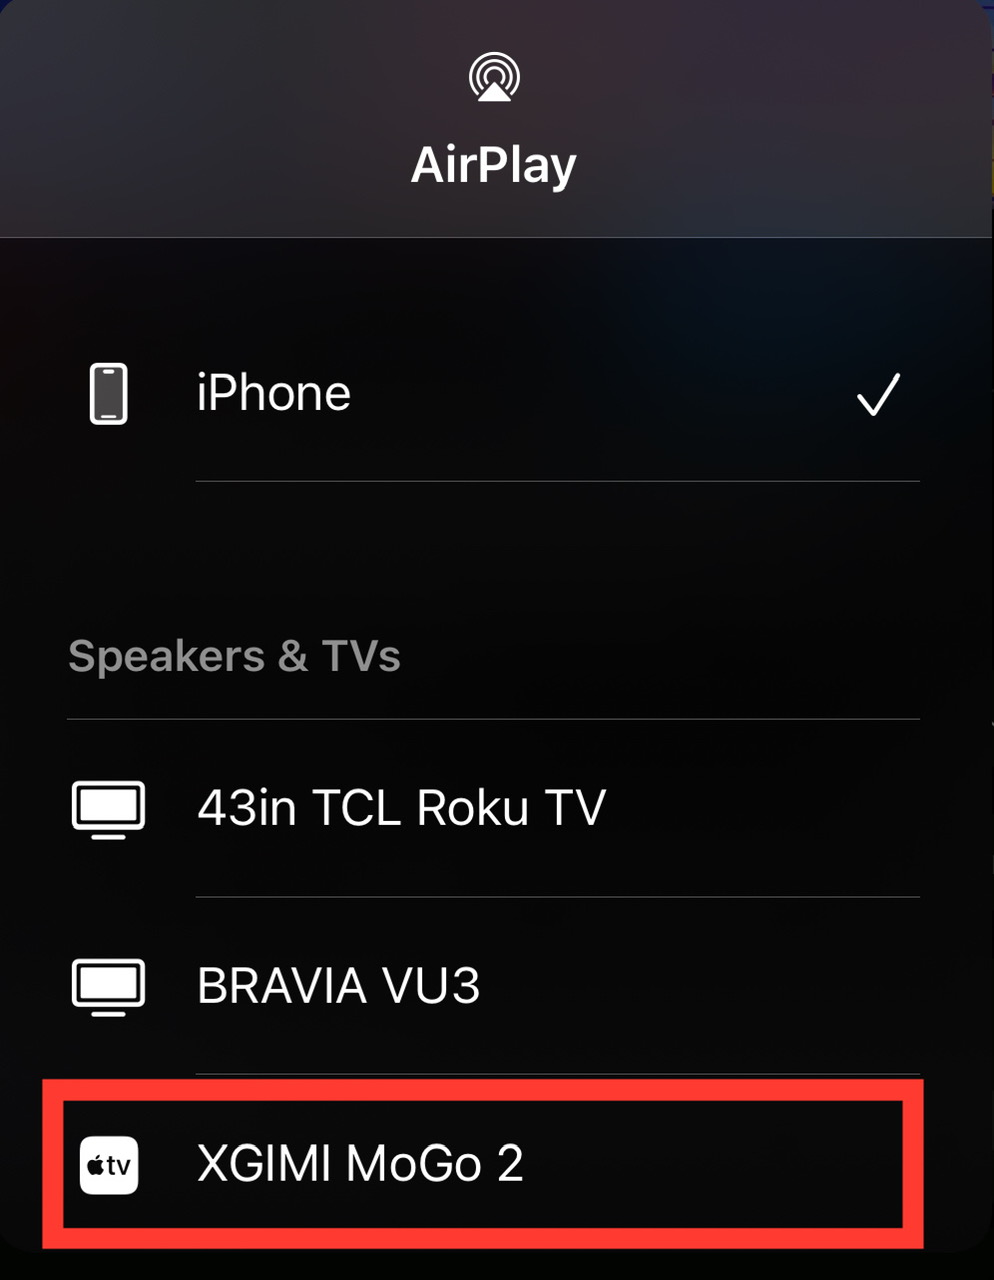 xgimi mogo 2 is highlighted on the airplay list